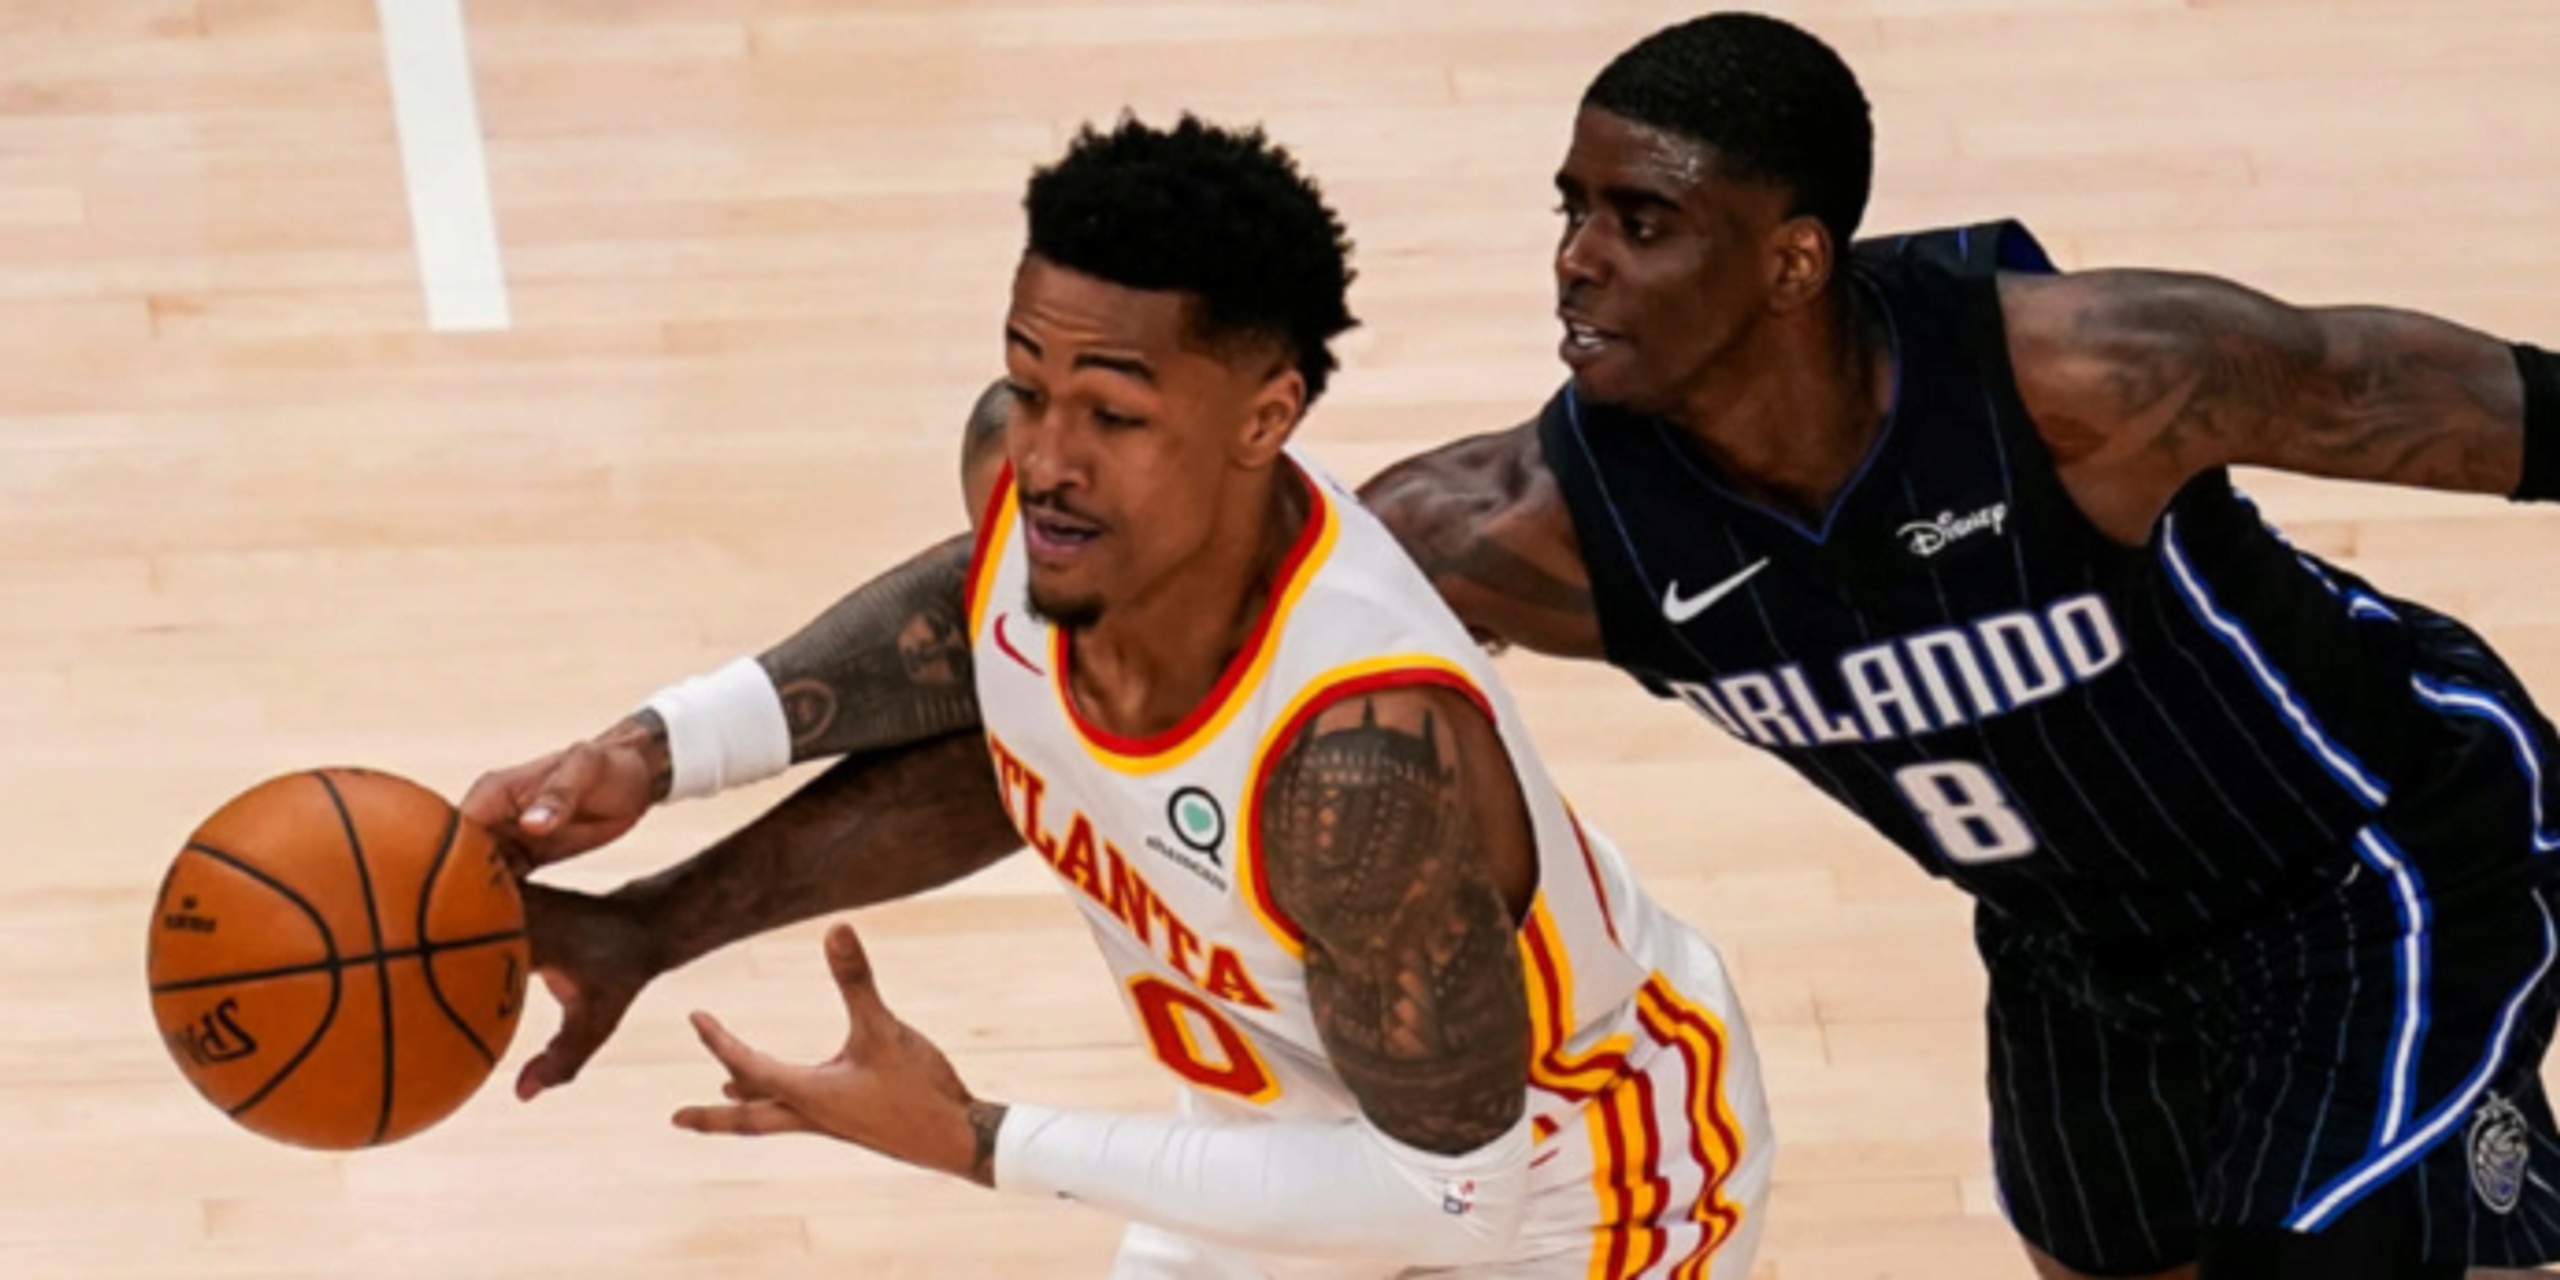 John Collins to hit 2021 free agency without contract extension